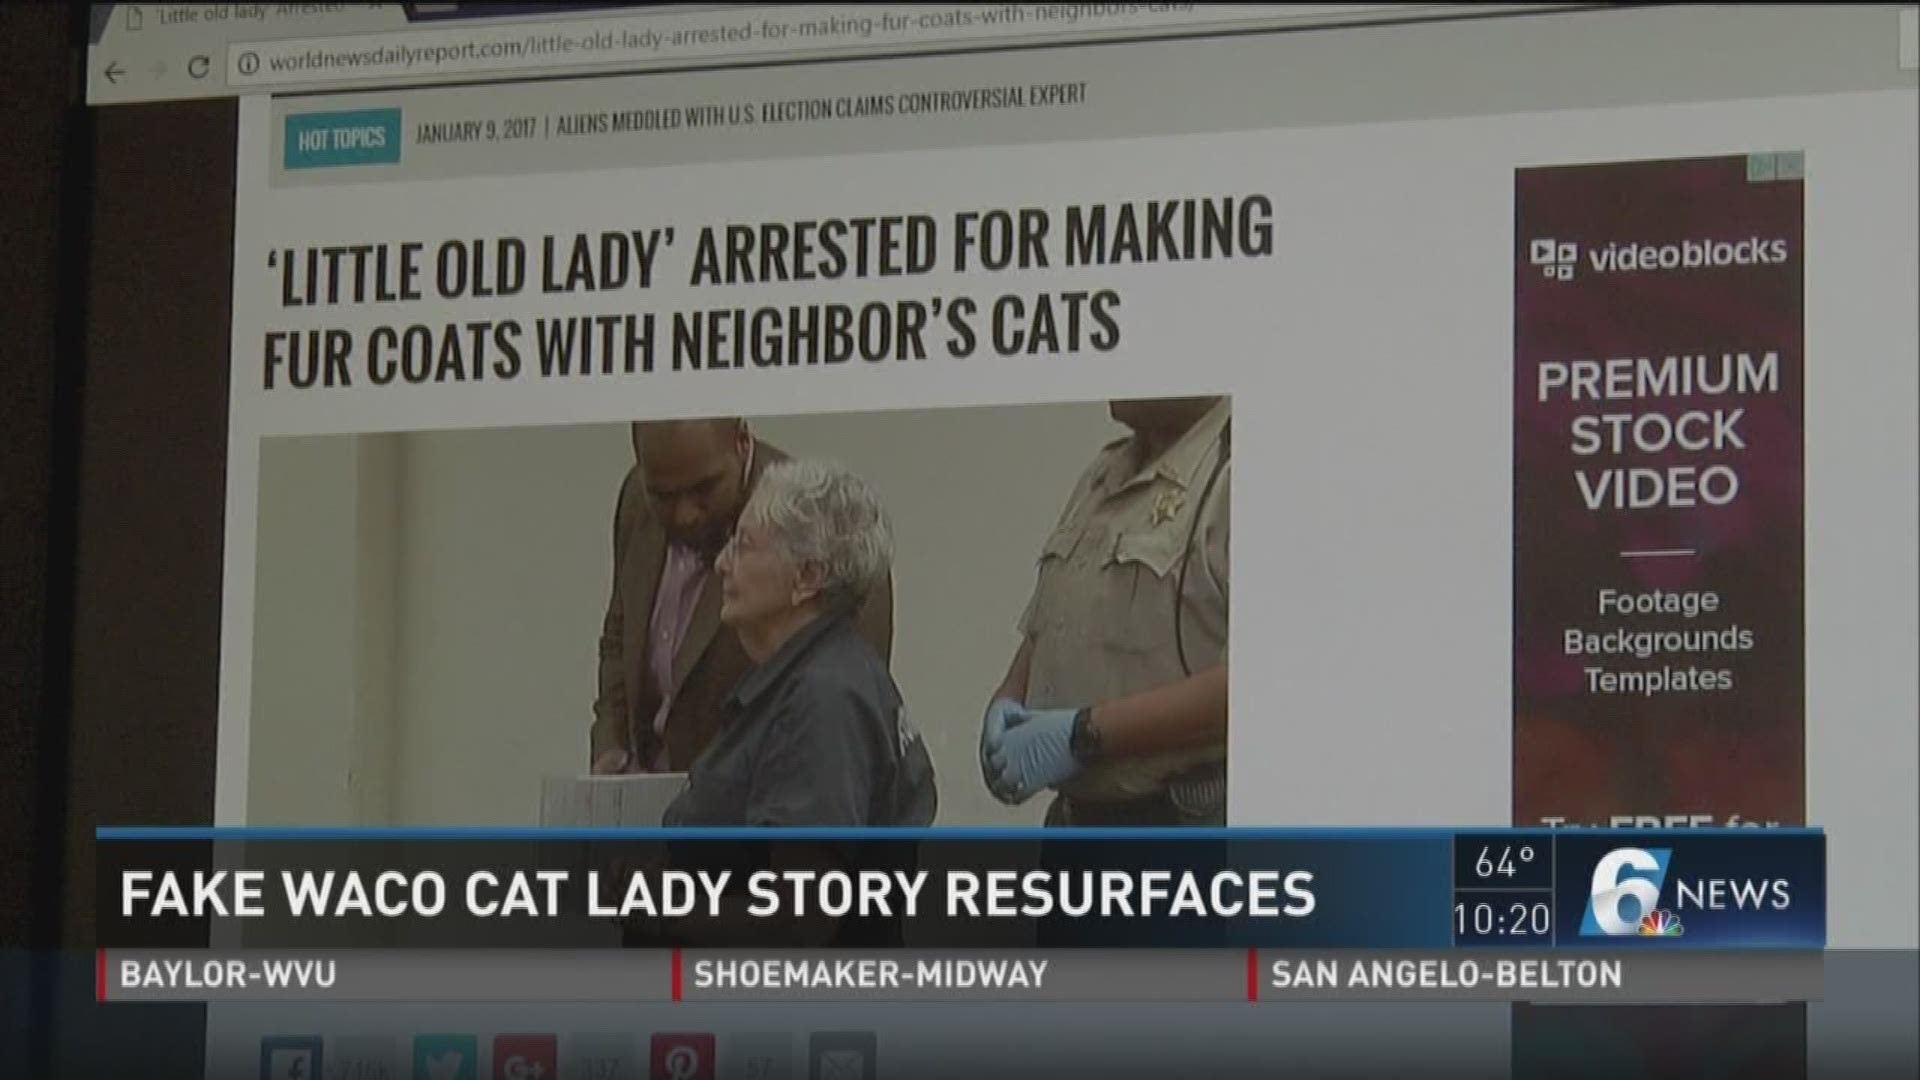 Thousands shared a fake news article about an elderly Waco woman arrested for making fur coats out of her neighbors' cats.